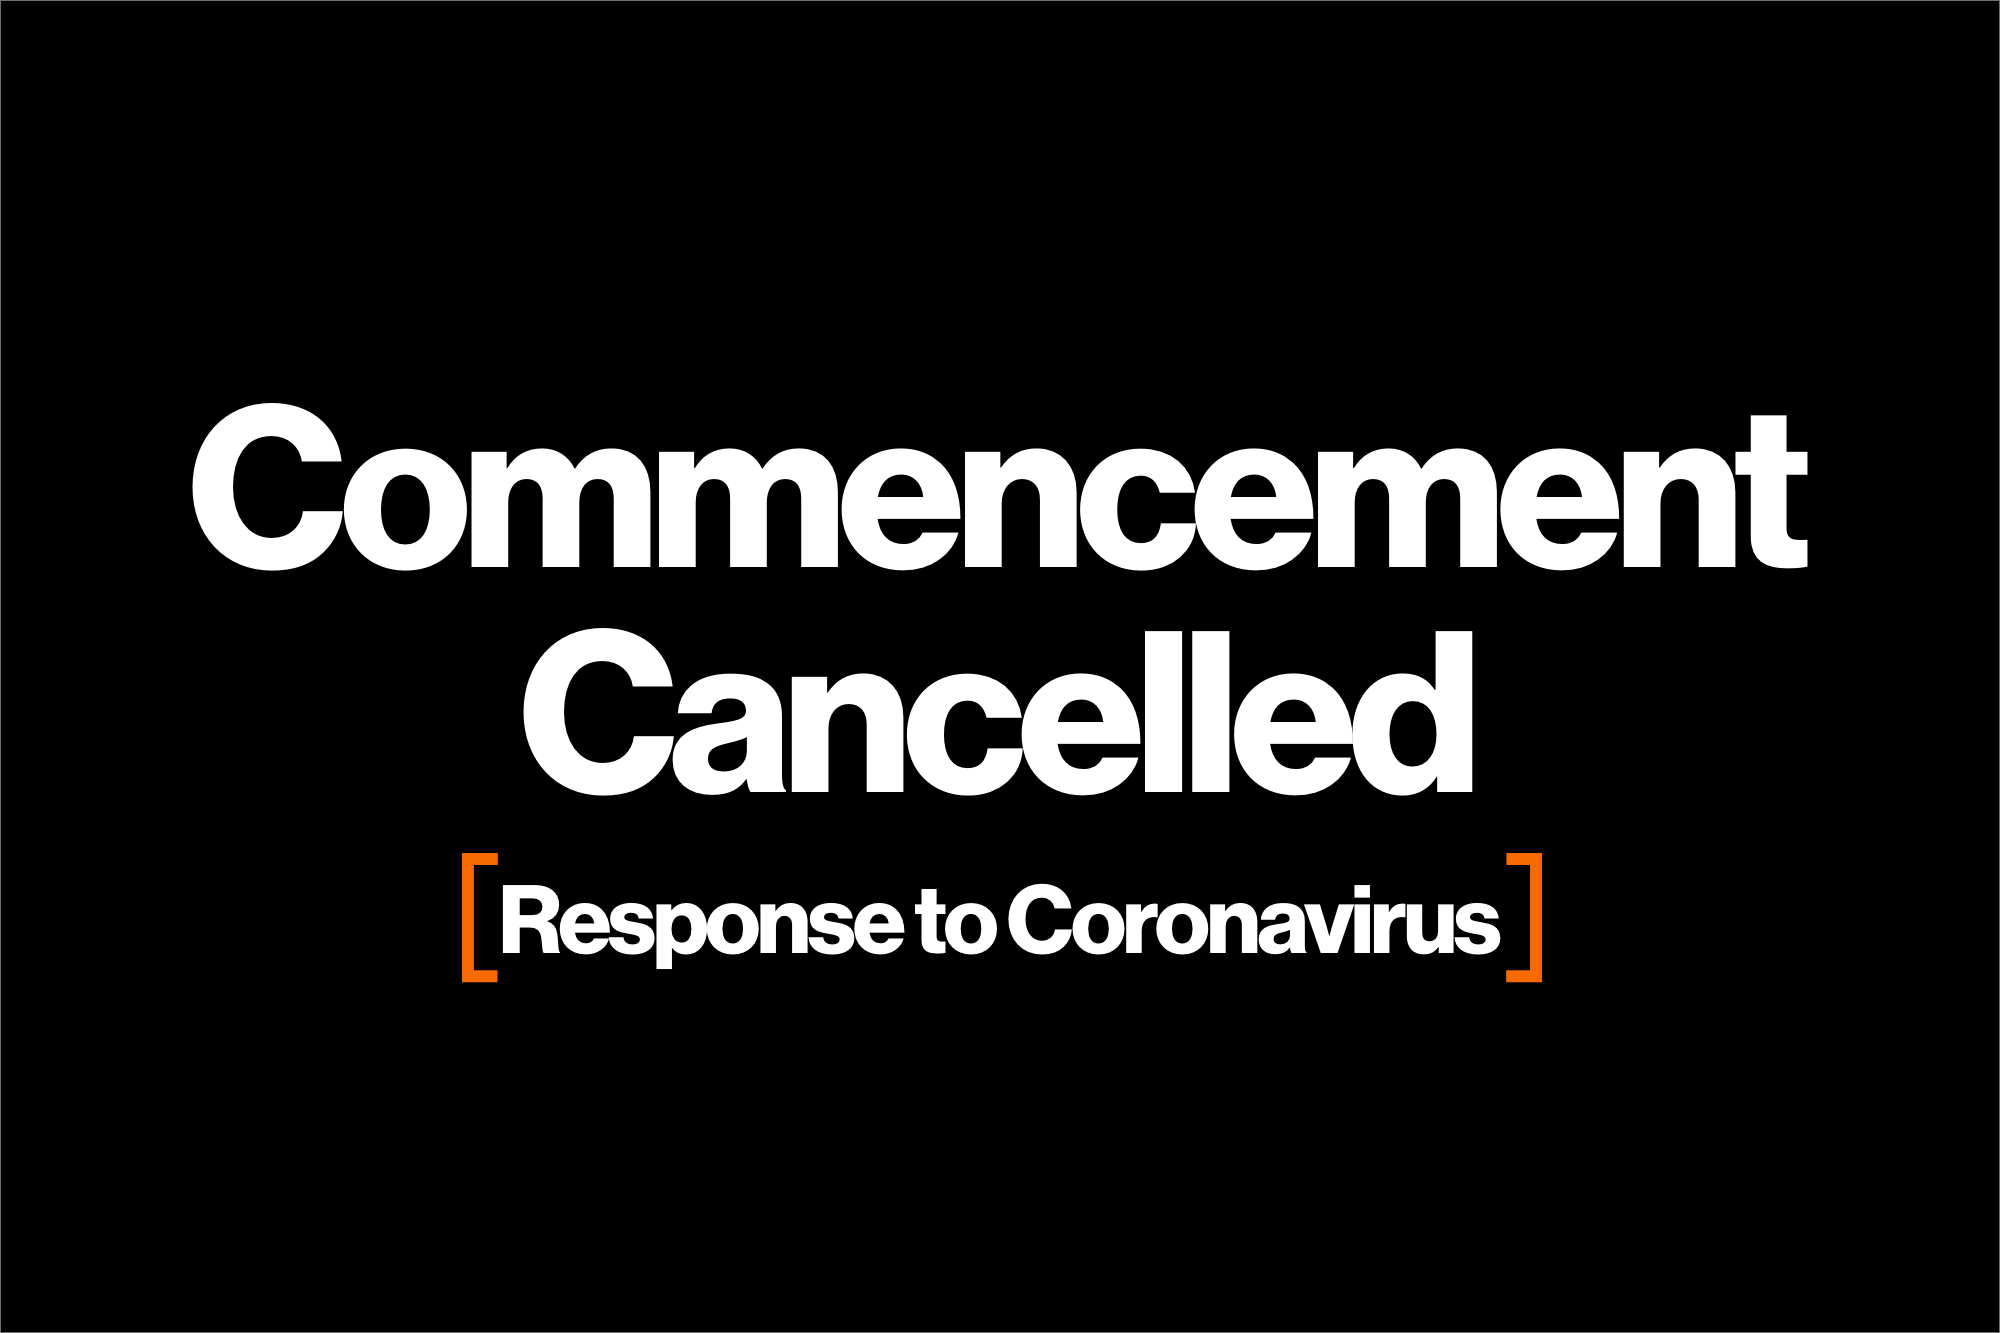 Commencement Cancelled